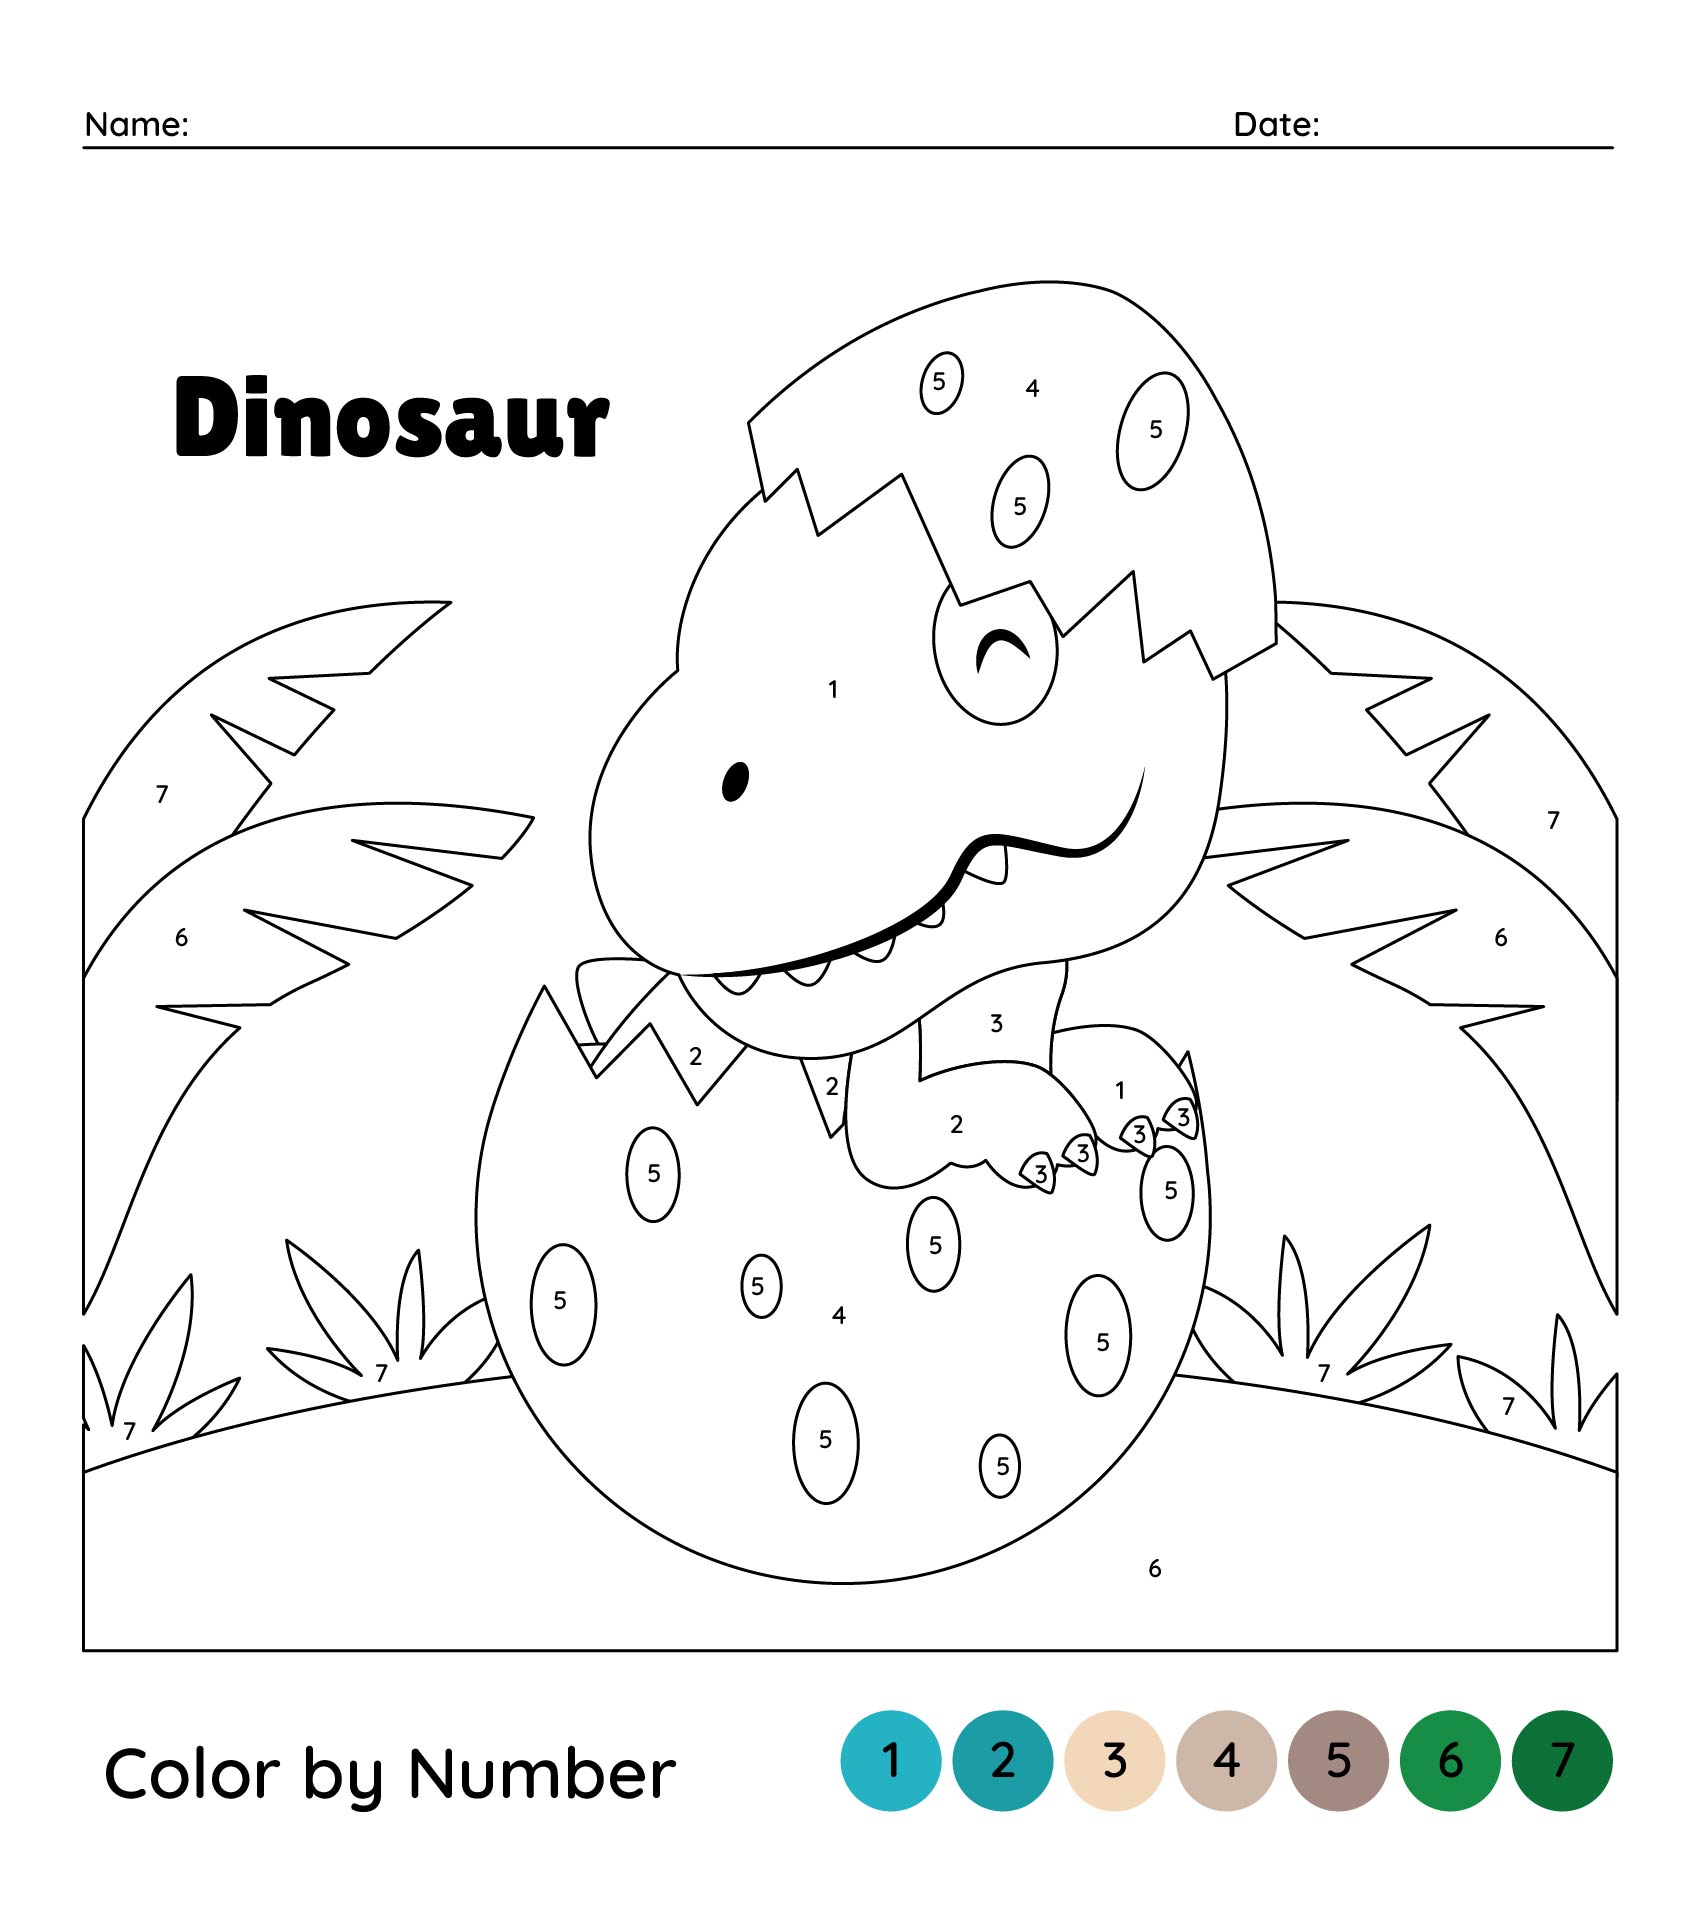 Dinosaur Color by Number Coloring Page